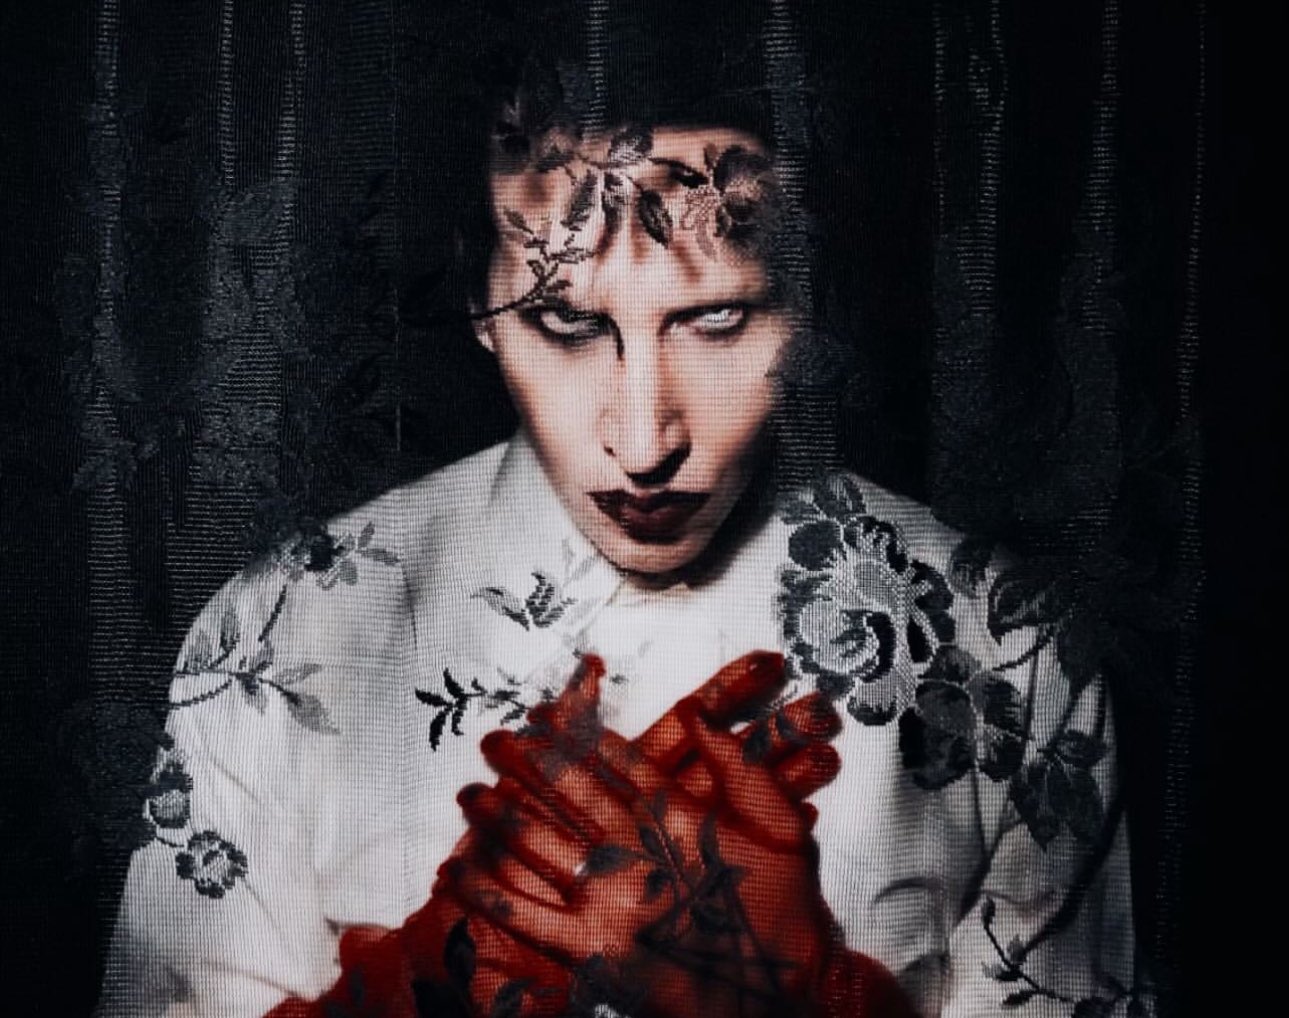 Marilyn Manson Valentine's Day Message and Portrait by Lindsay Usich